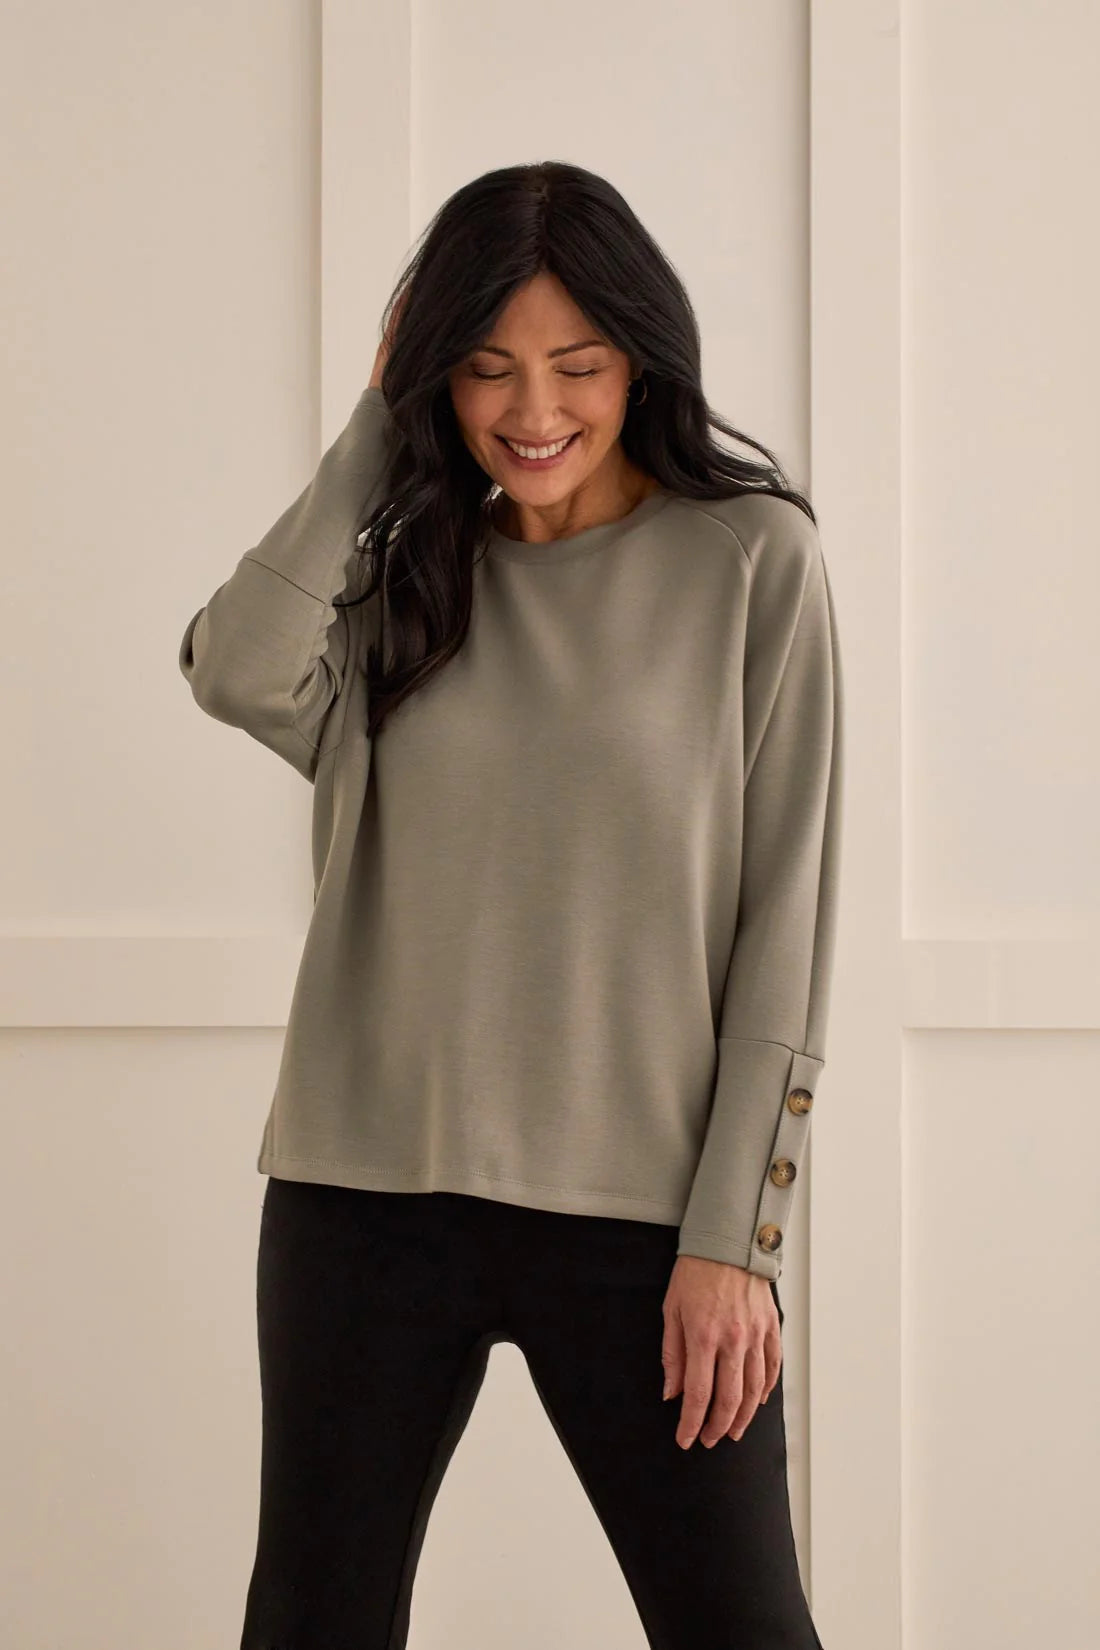 Everyday clothing just got a whole lot more fashionable. We love how this long-sleeve top matches everything in our wardrobe! 